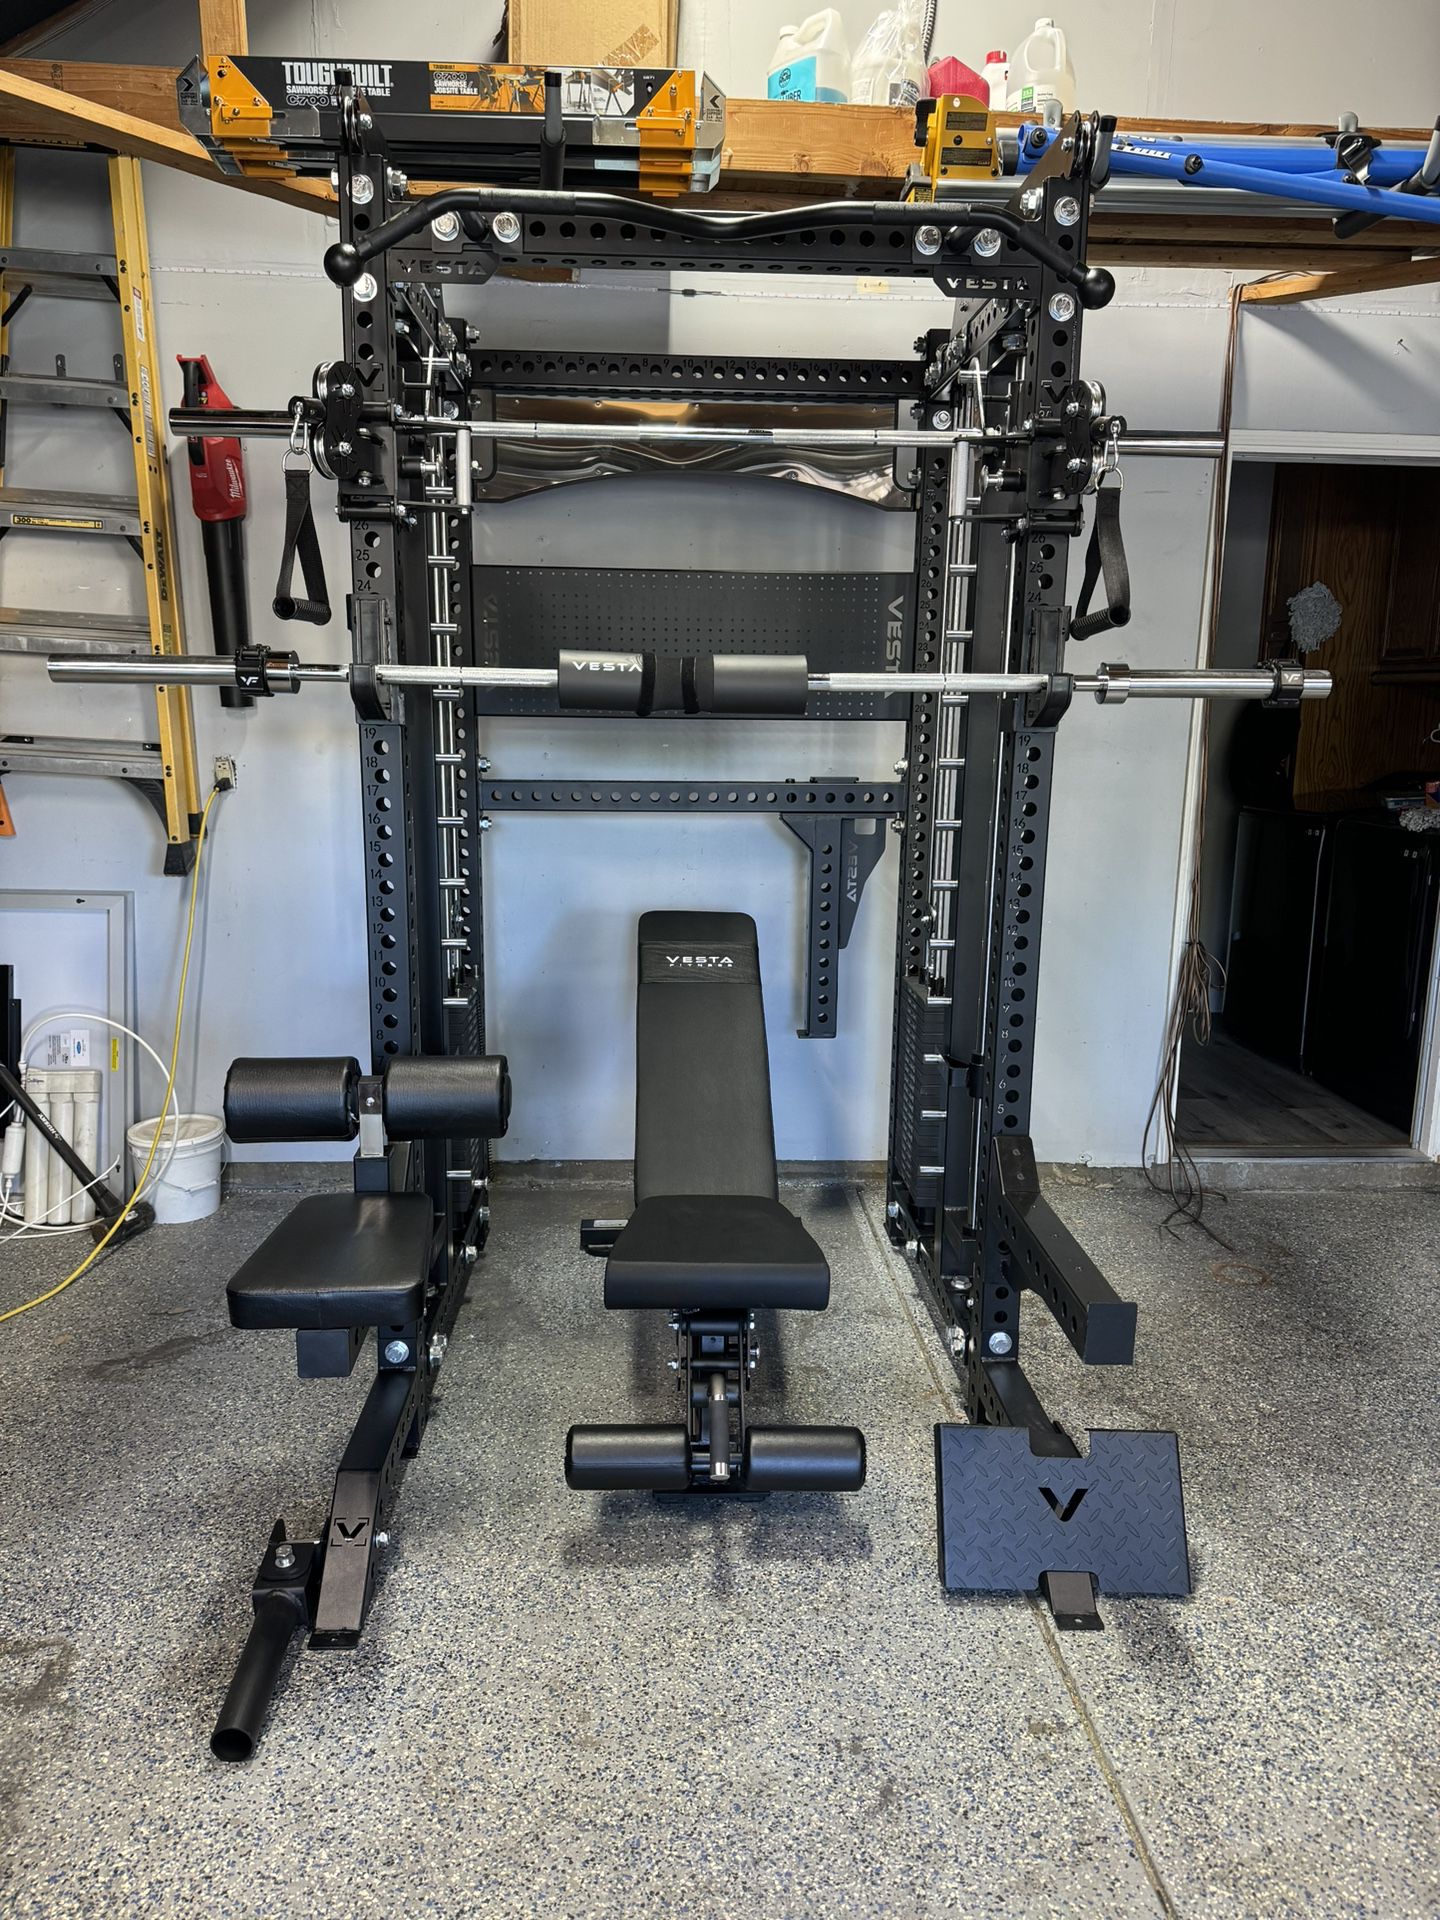 New Vesta Ultimate Rack w/Smith Machine |Functional Trainer| 400 Weight Stack|11 Gauge Steel | Commercial Grade |Gym Equipment|Free Delivery 